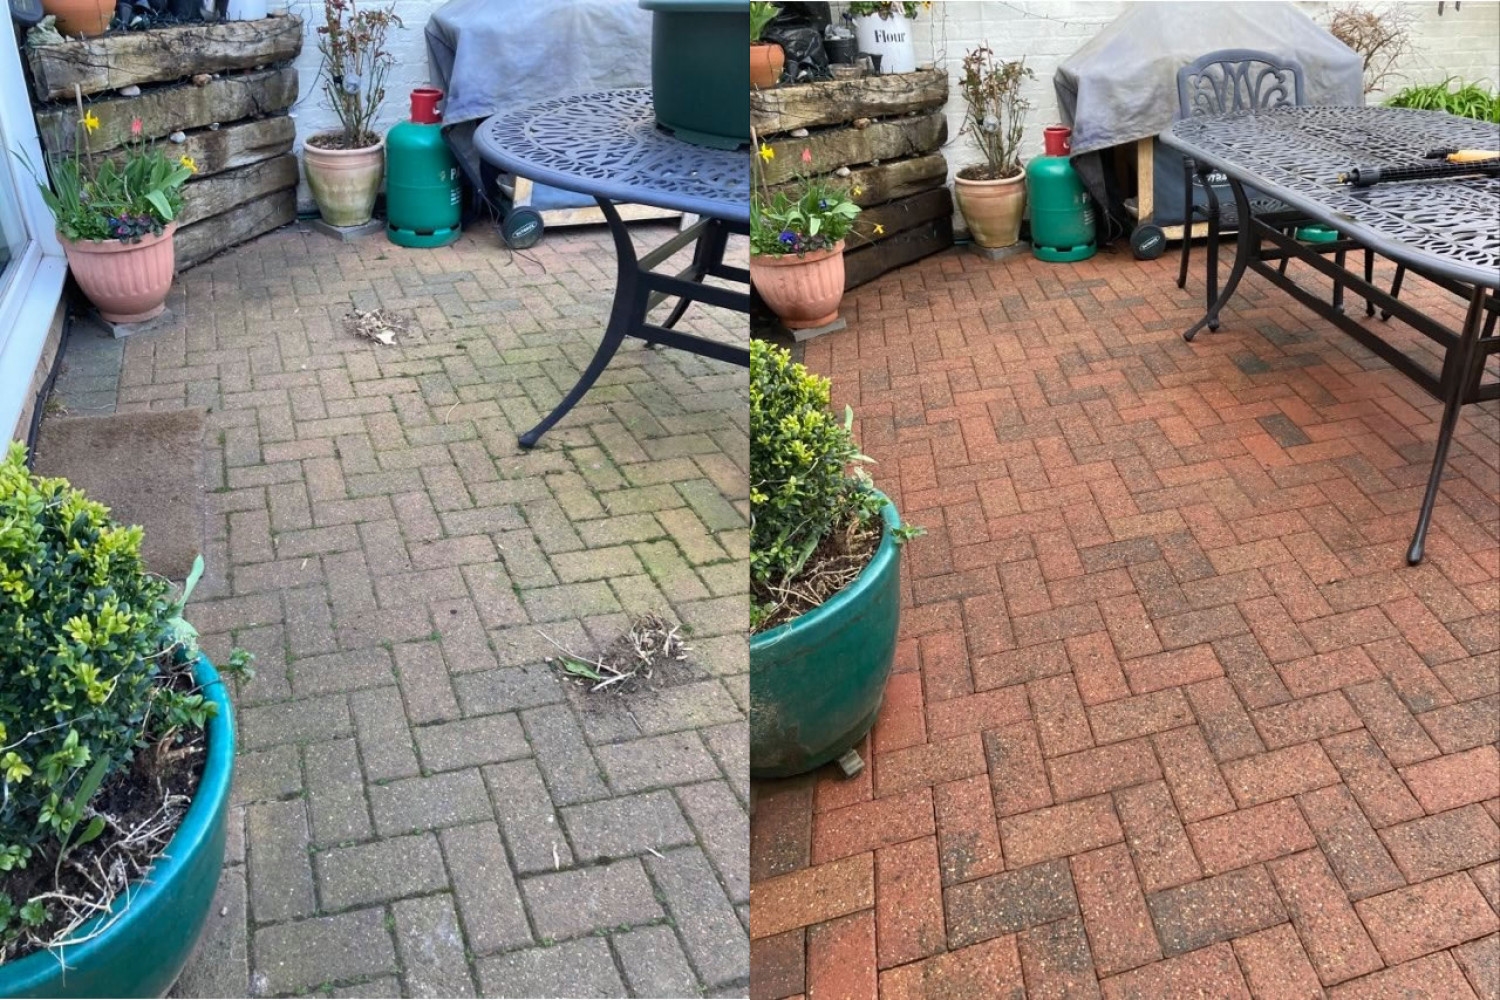 Jet washed patio before & after  - Before & After Photos -  LONG'S LAWNS